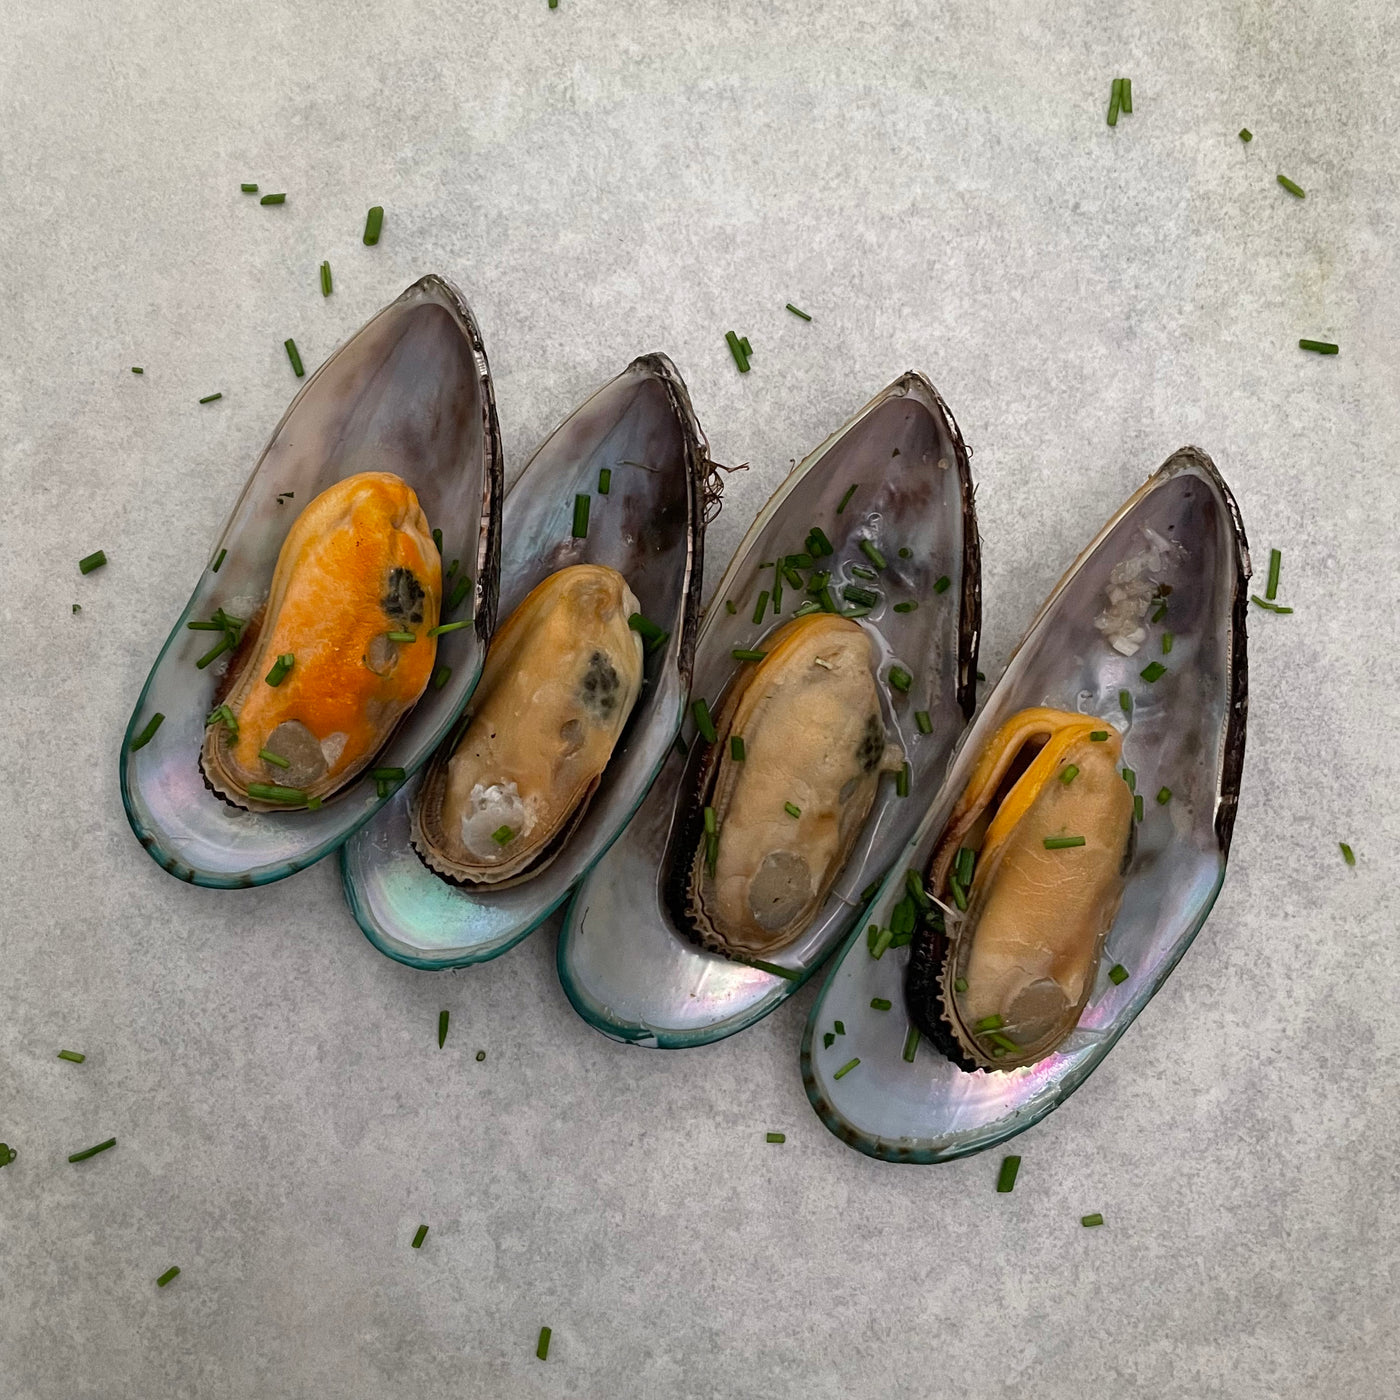 Green-lipped Mussels